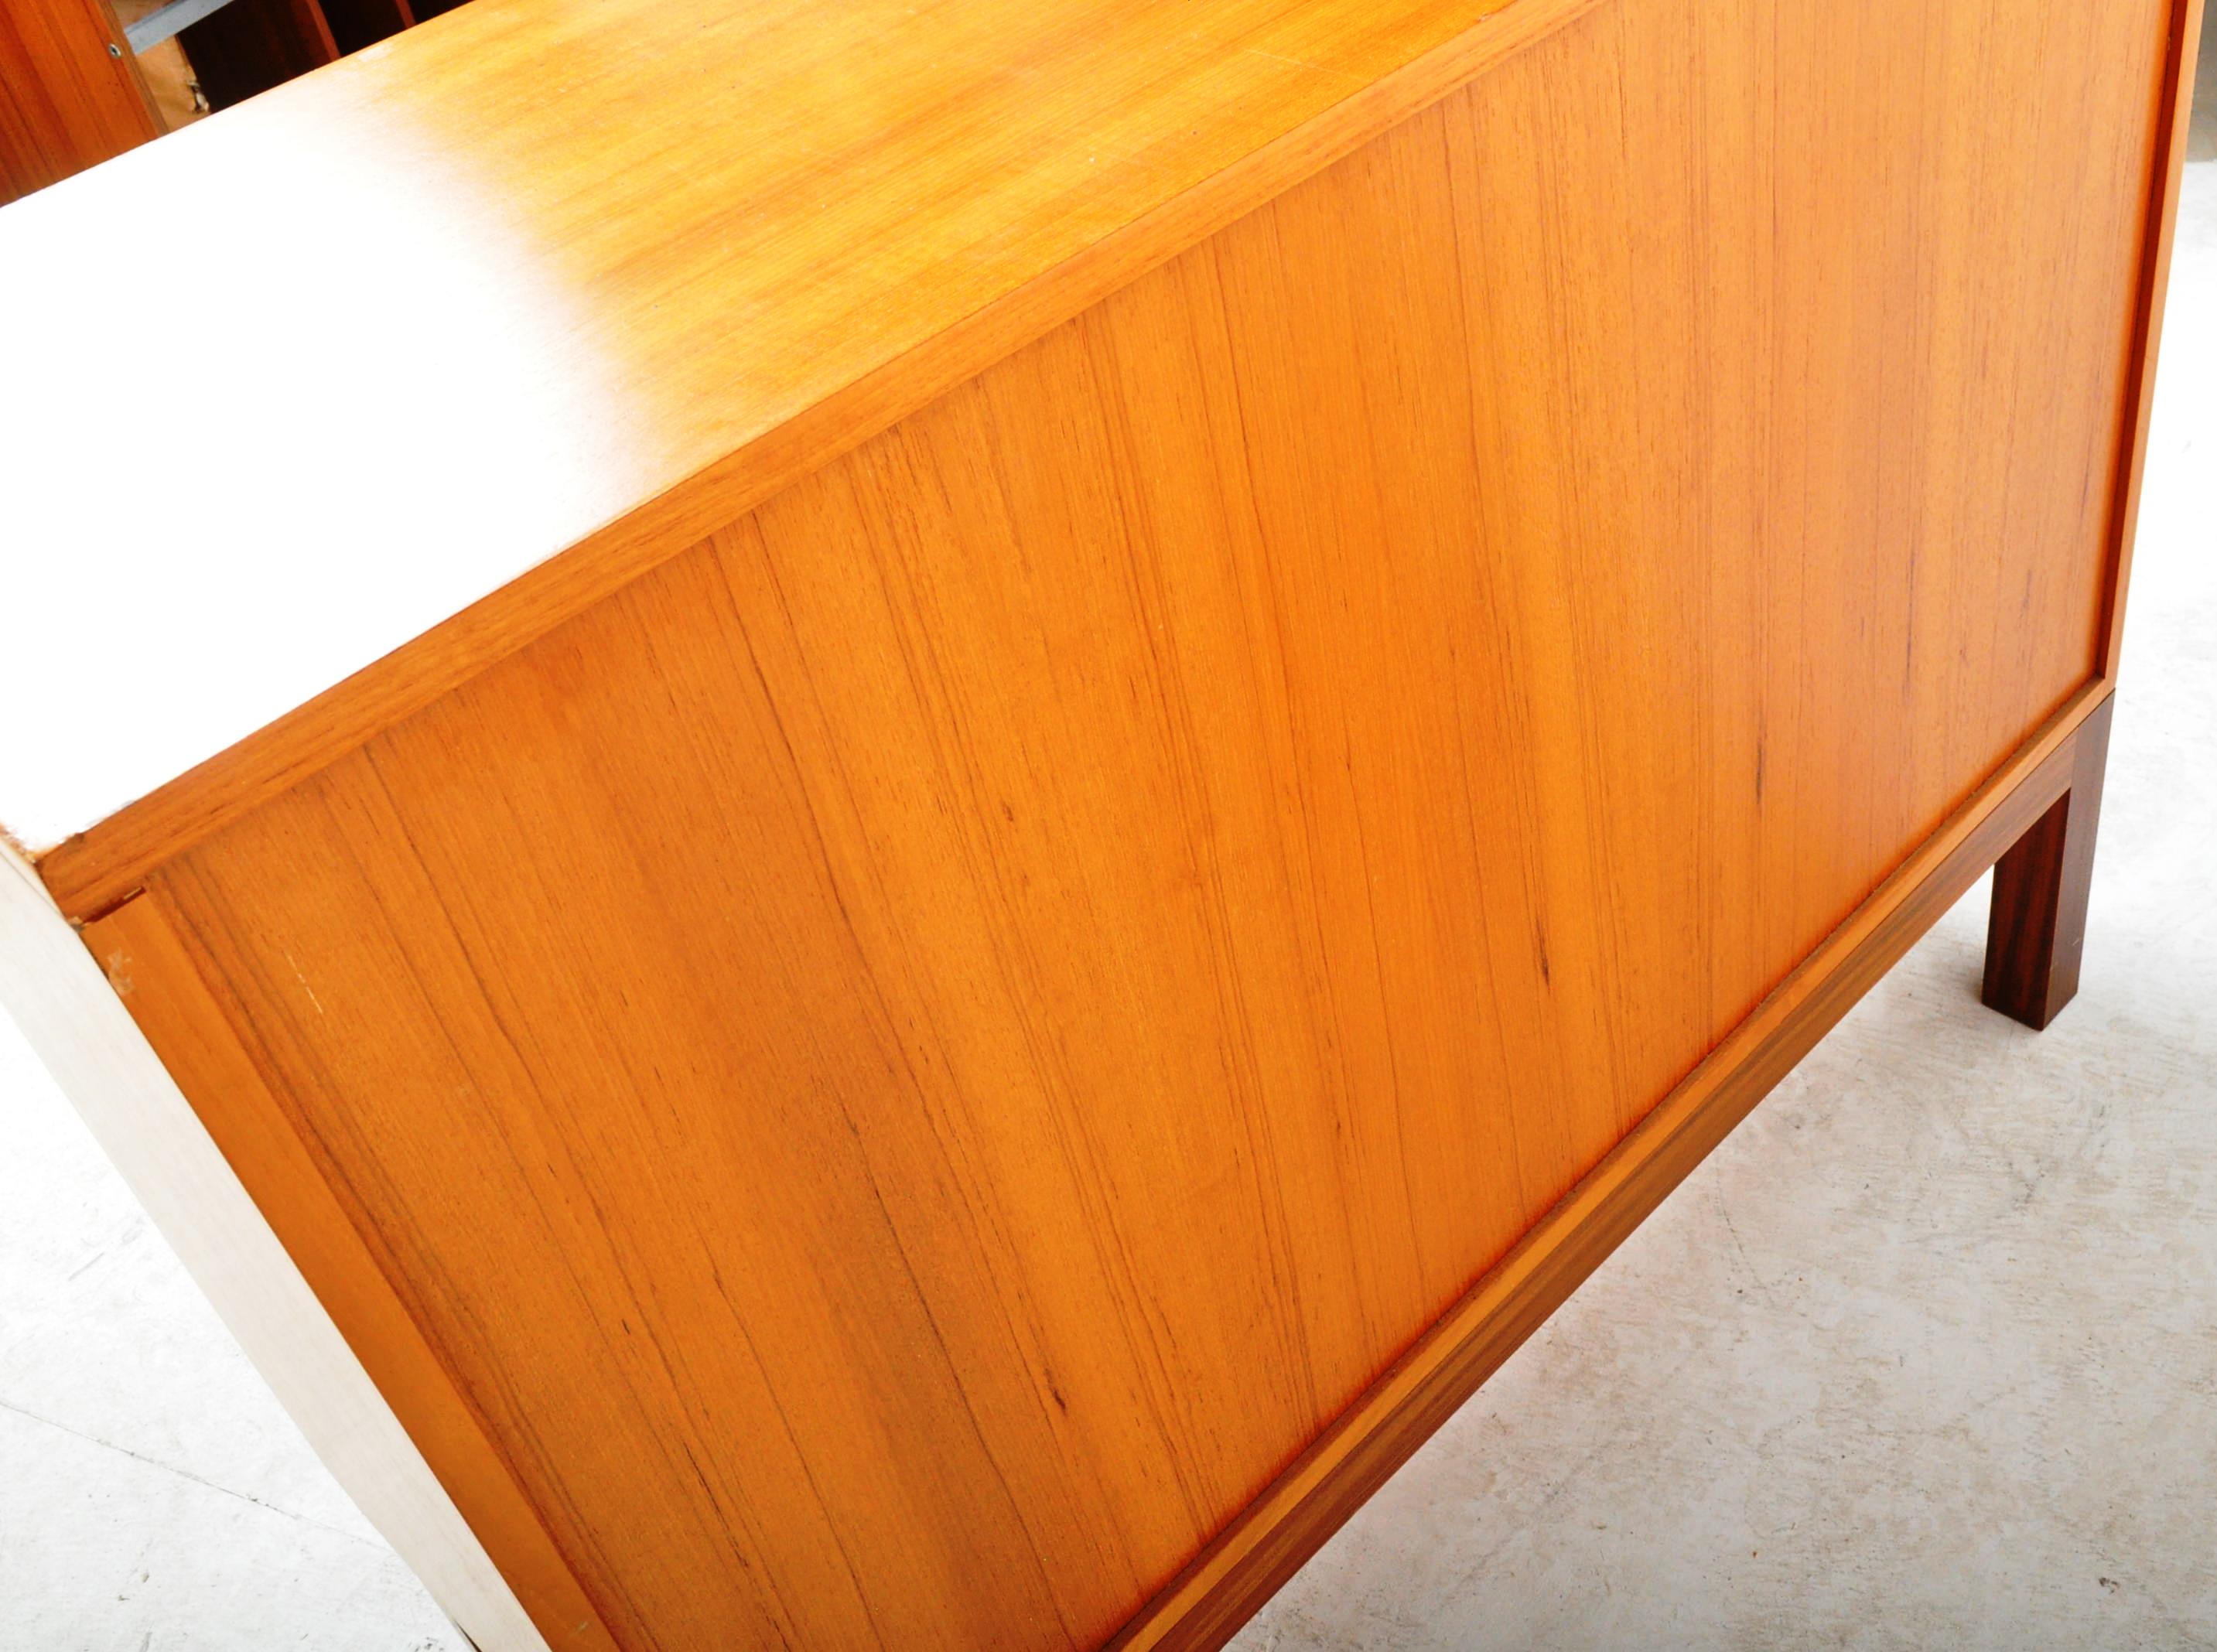 OFFICE FURNITURE - GOLD OAK BOOKCASE / DISPLAY CABINET - Image 5 of 5